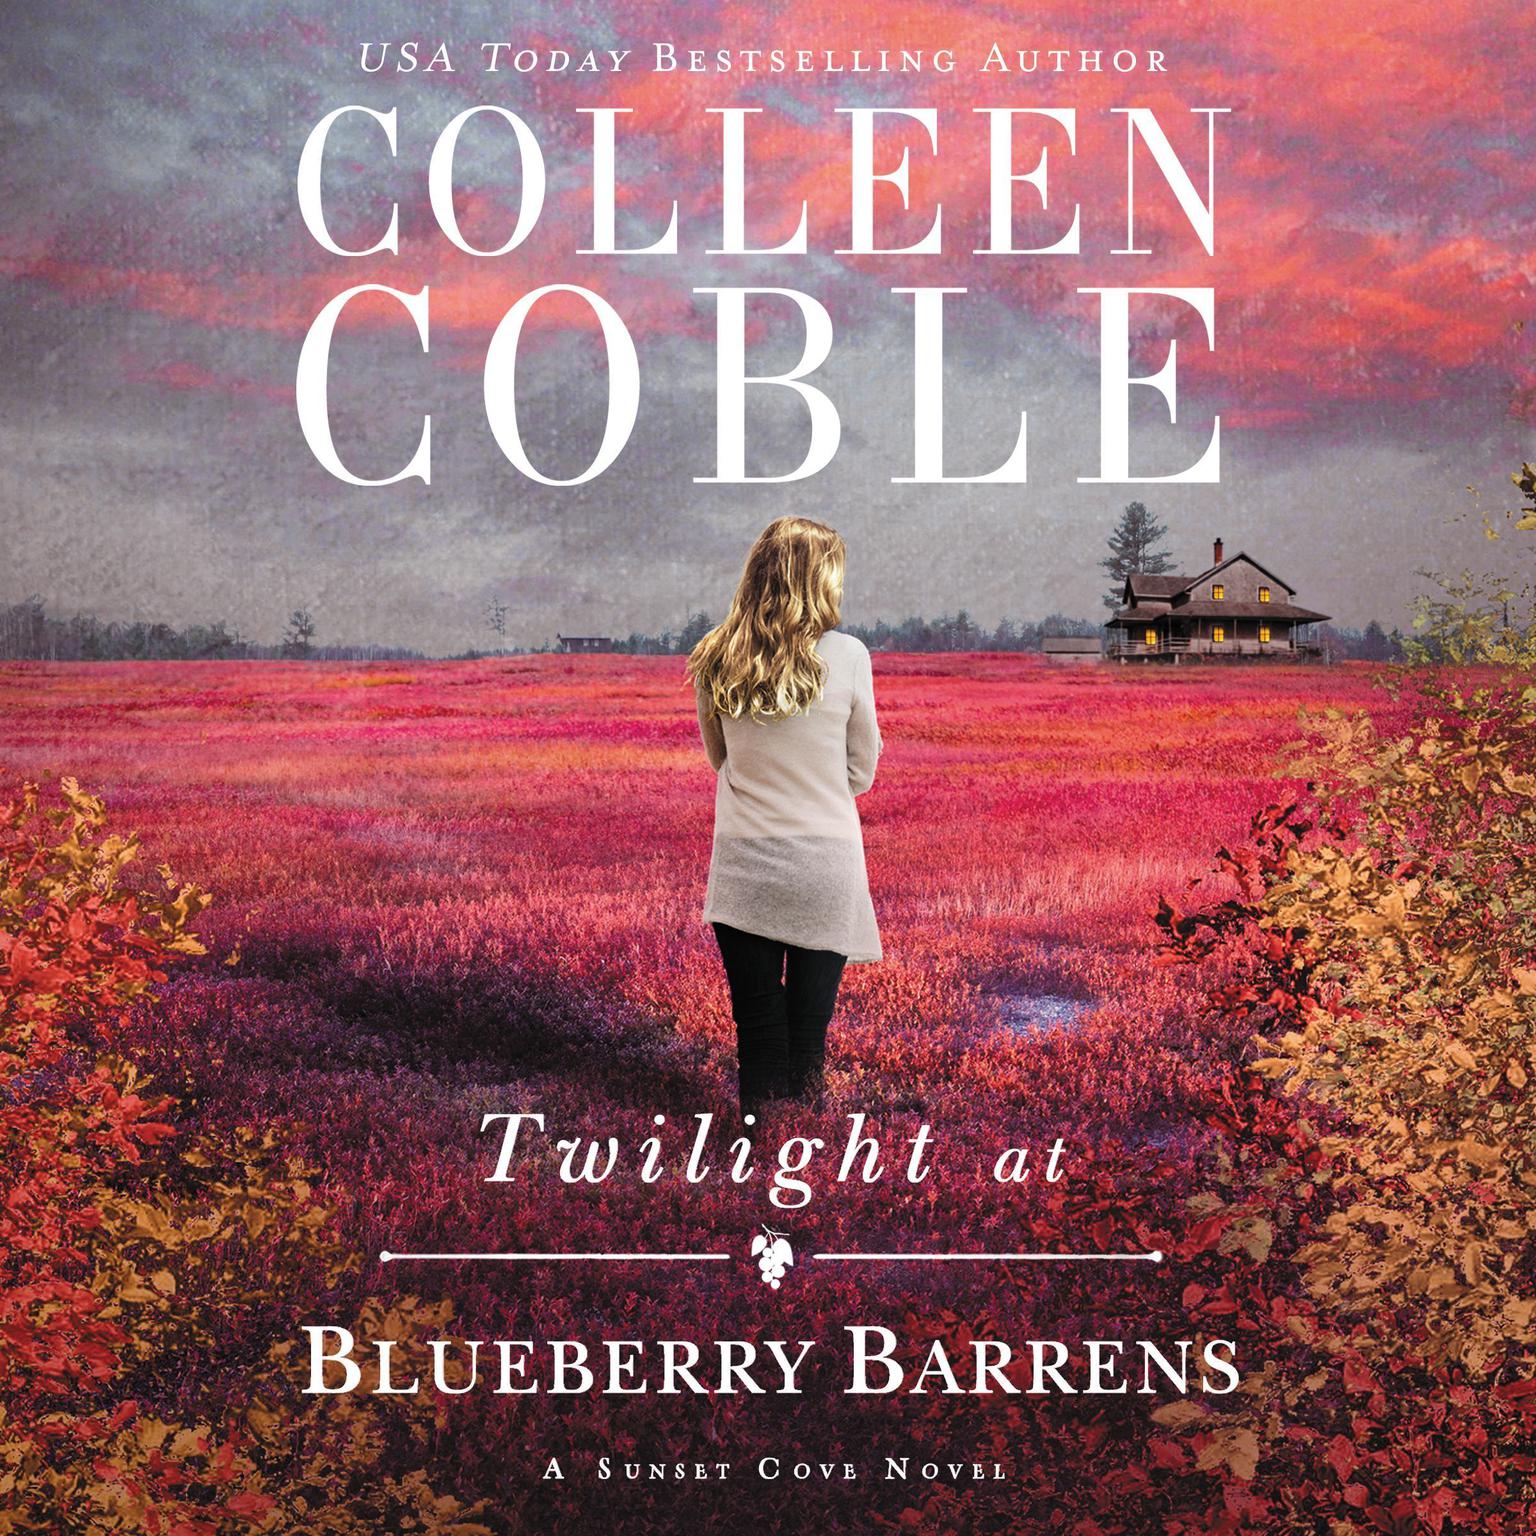 Twilight at Blueberry Barrens Audiobook, by Colleen Coble